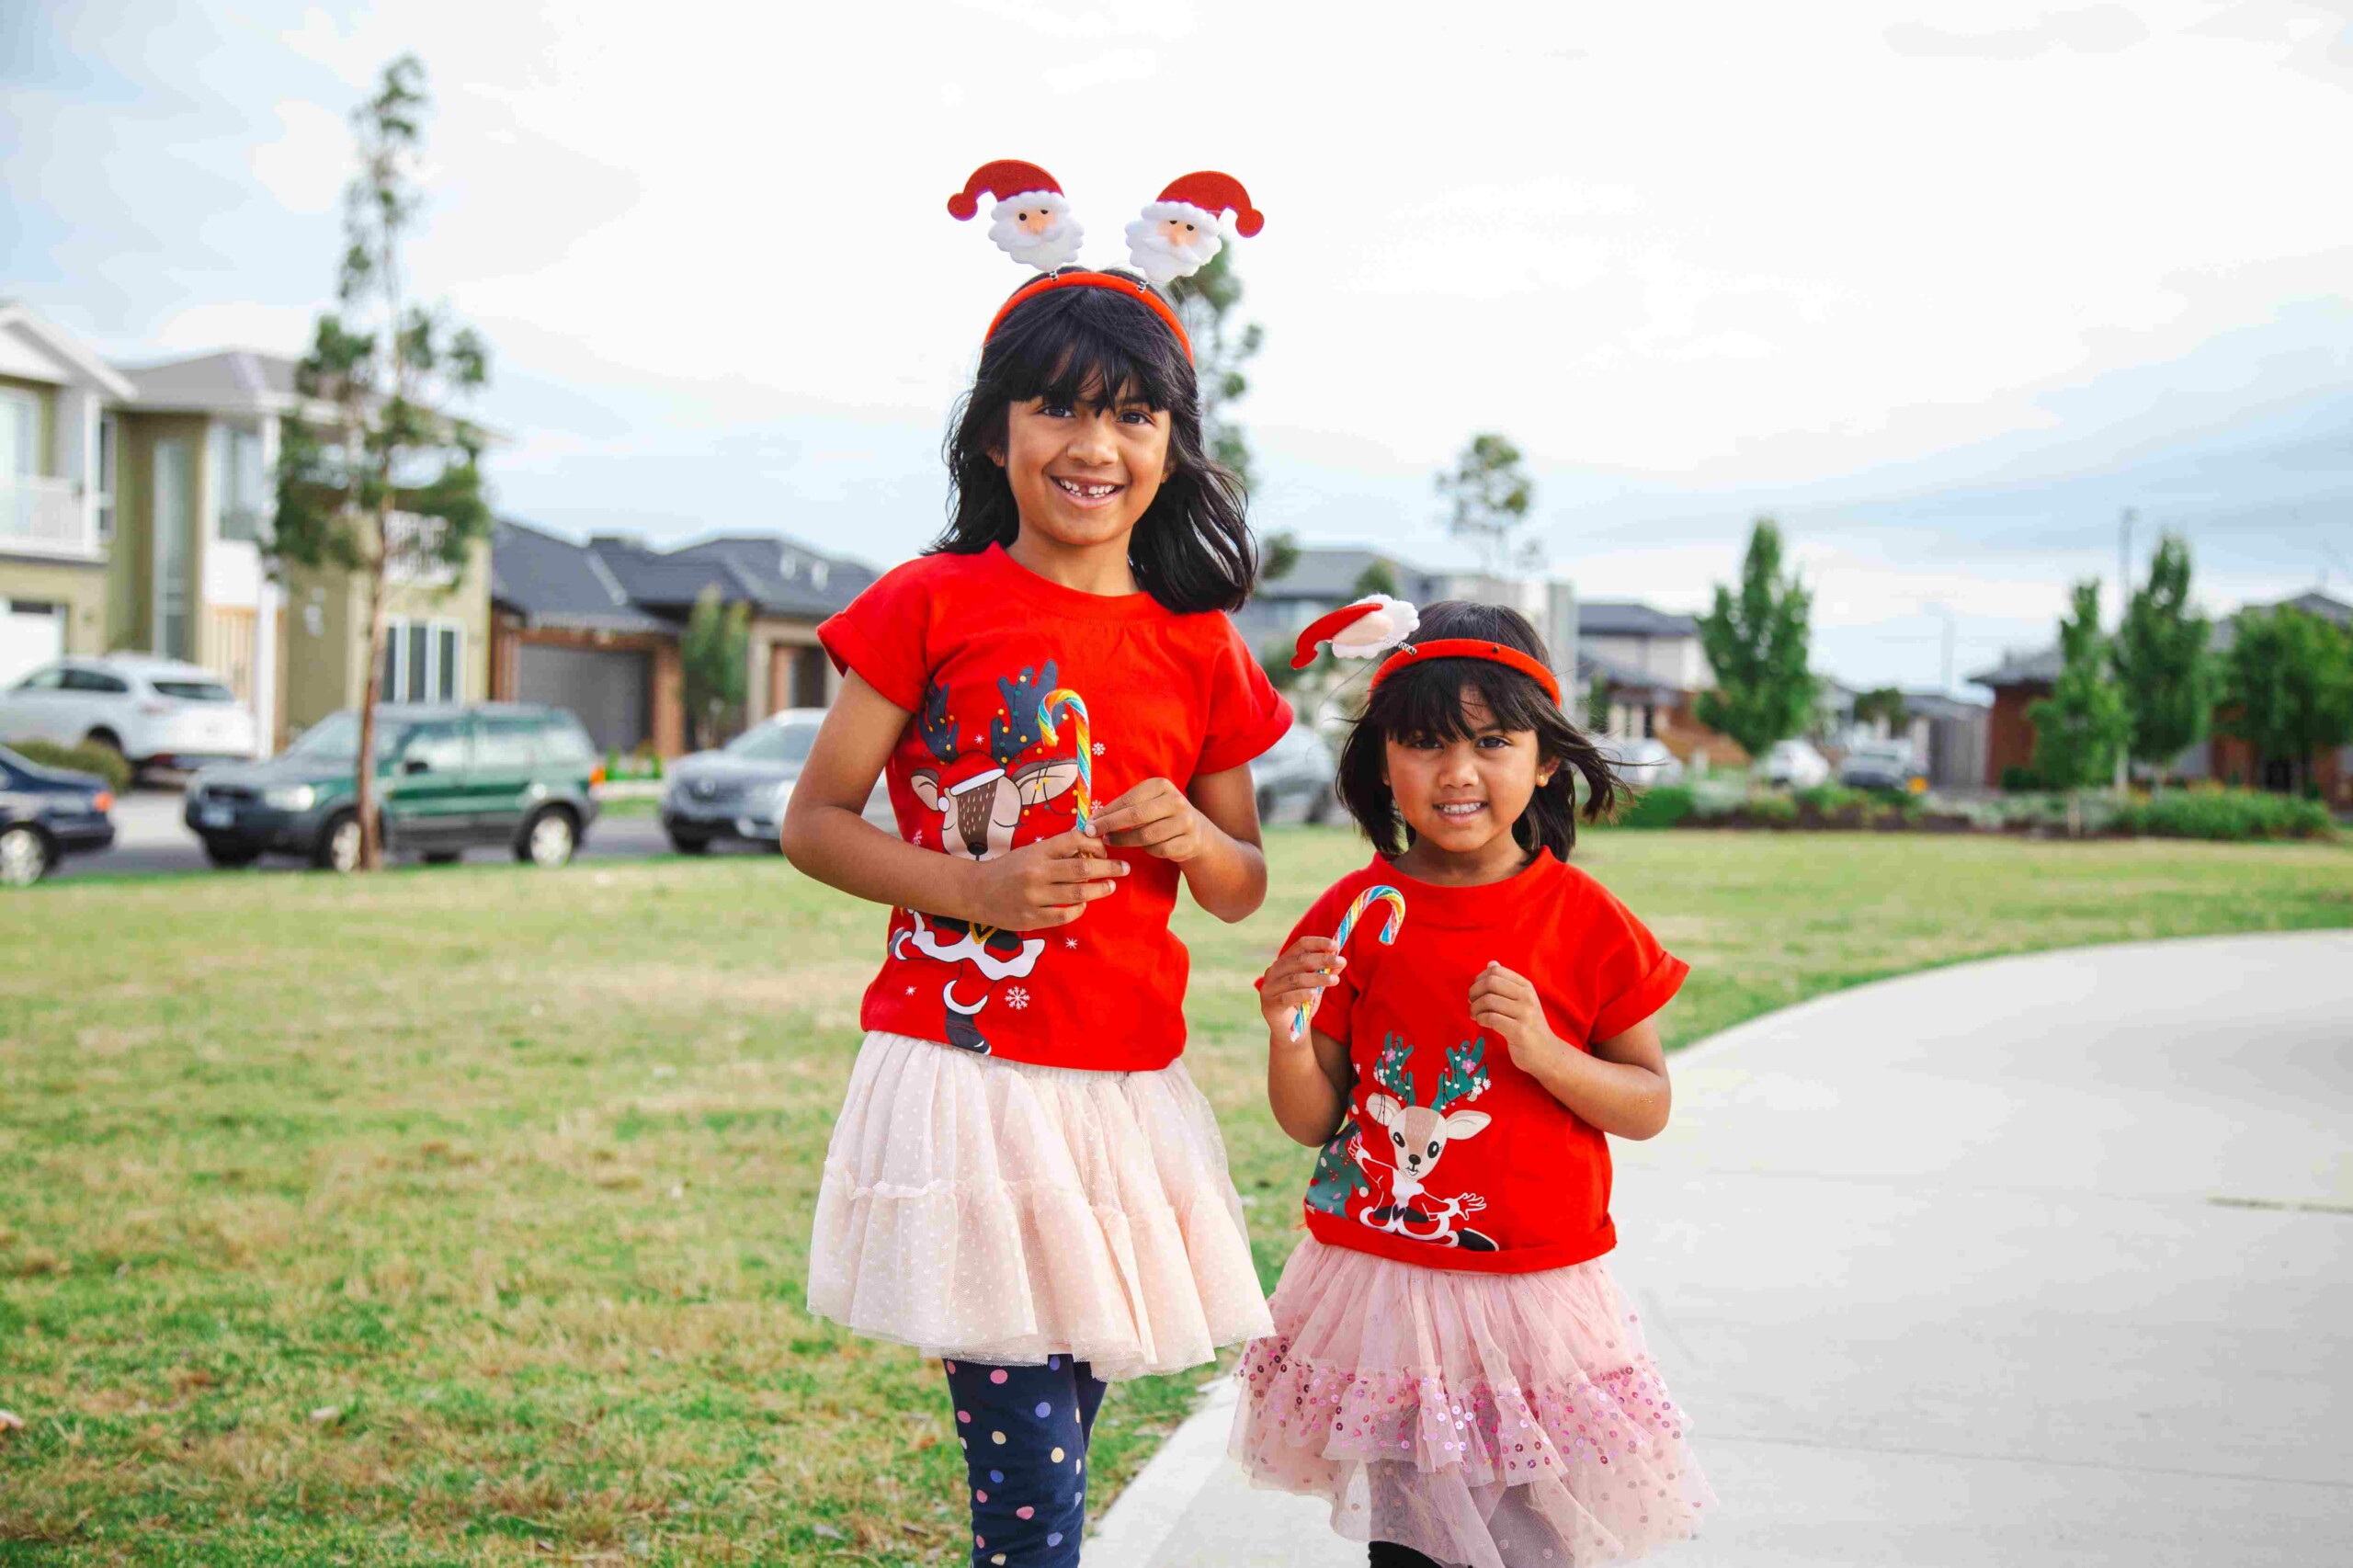 Arcadia Christmas movie night young children with candy canes